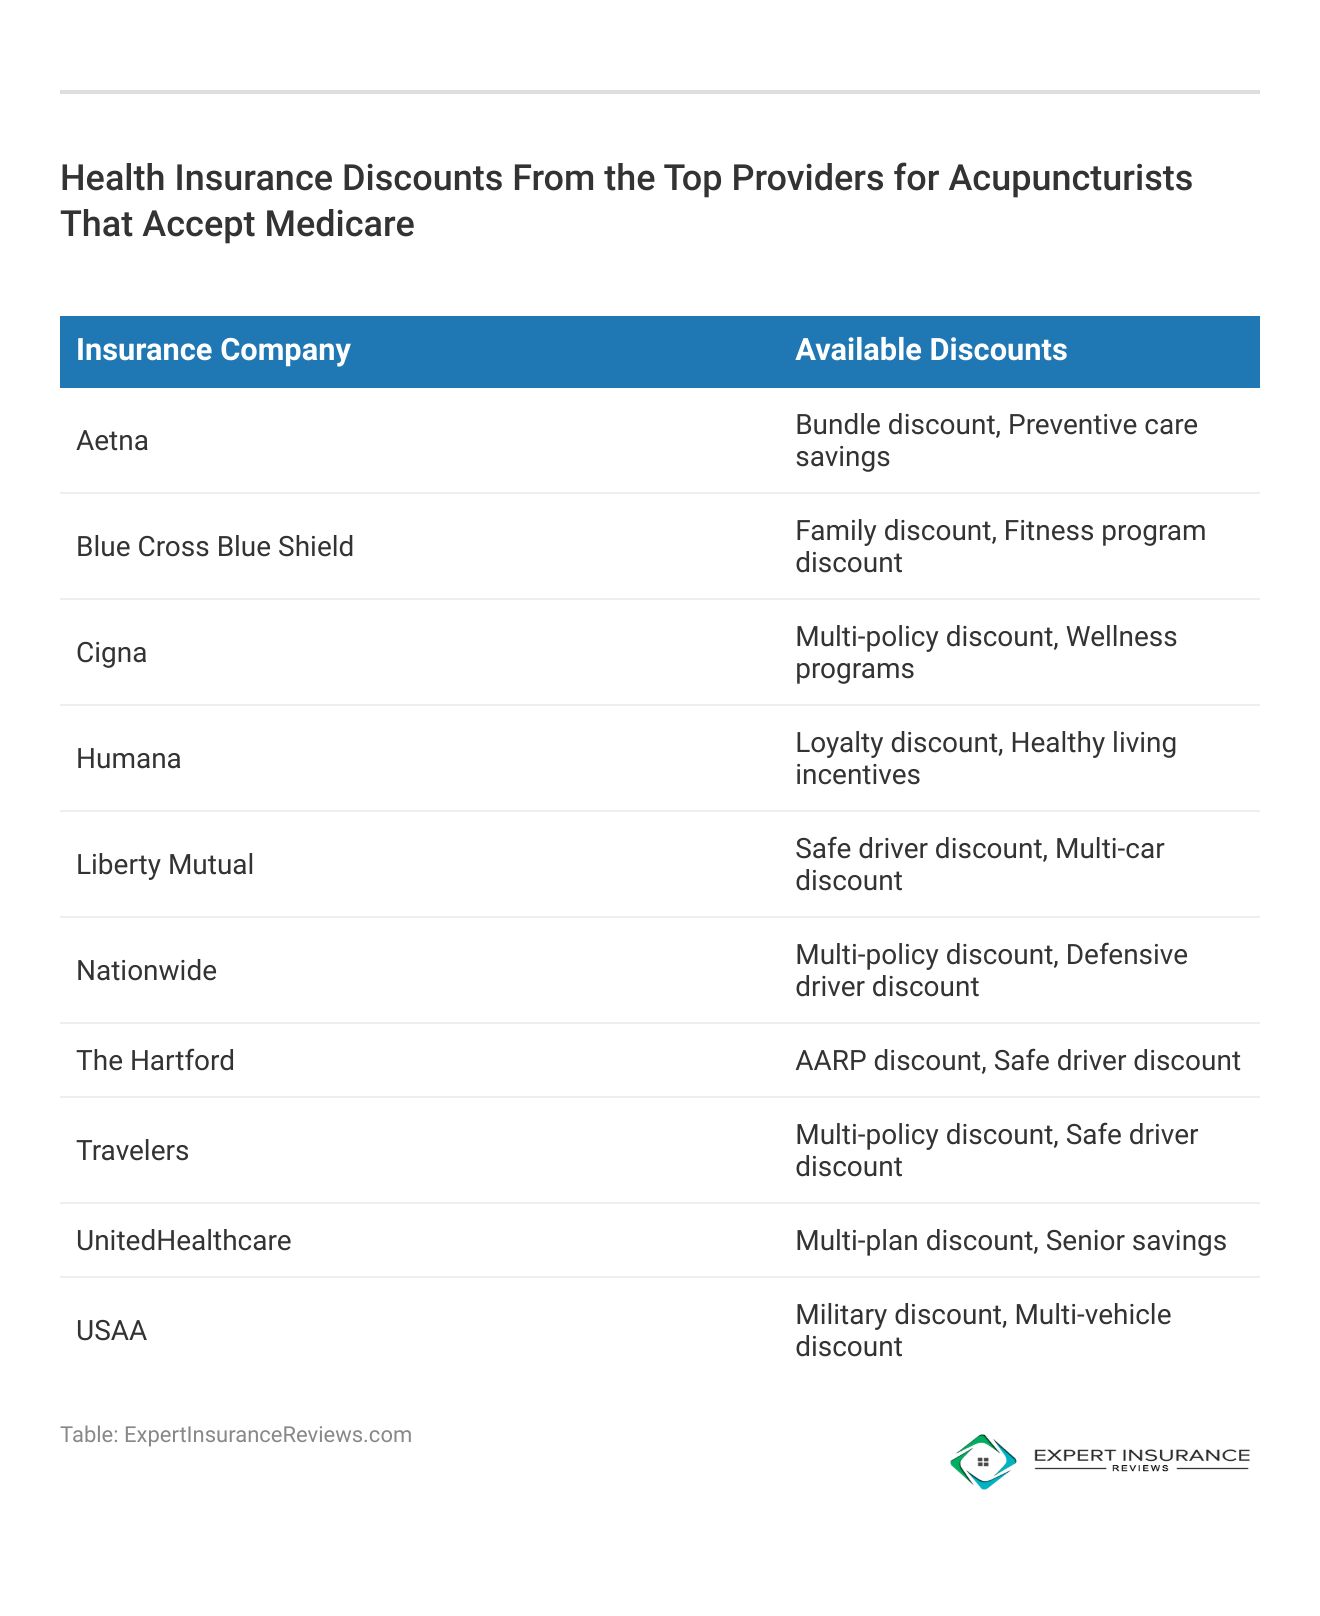 <h3>Health Insurance Discounts From the Top Providers for Acupuncturists That Accept Medicare</h3>